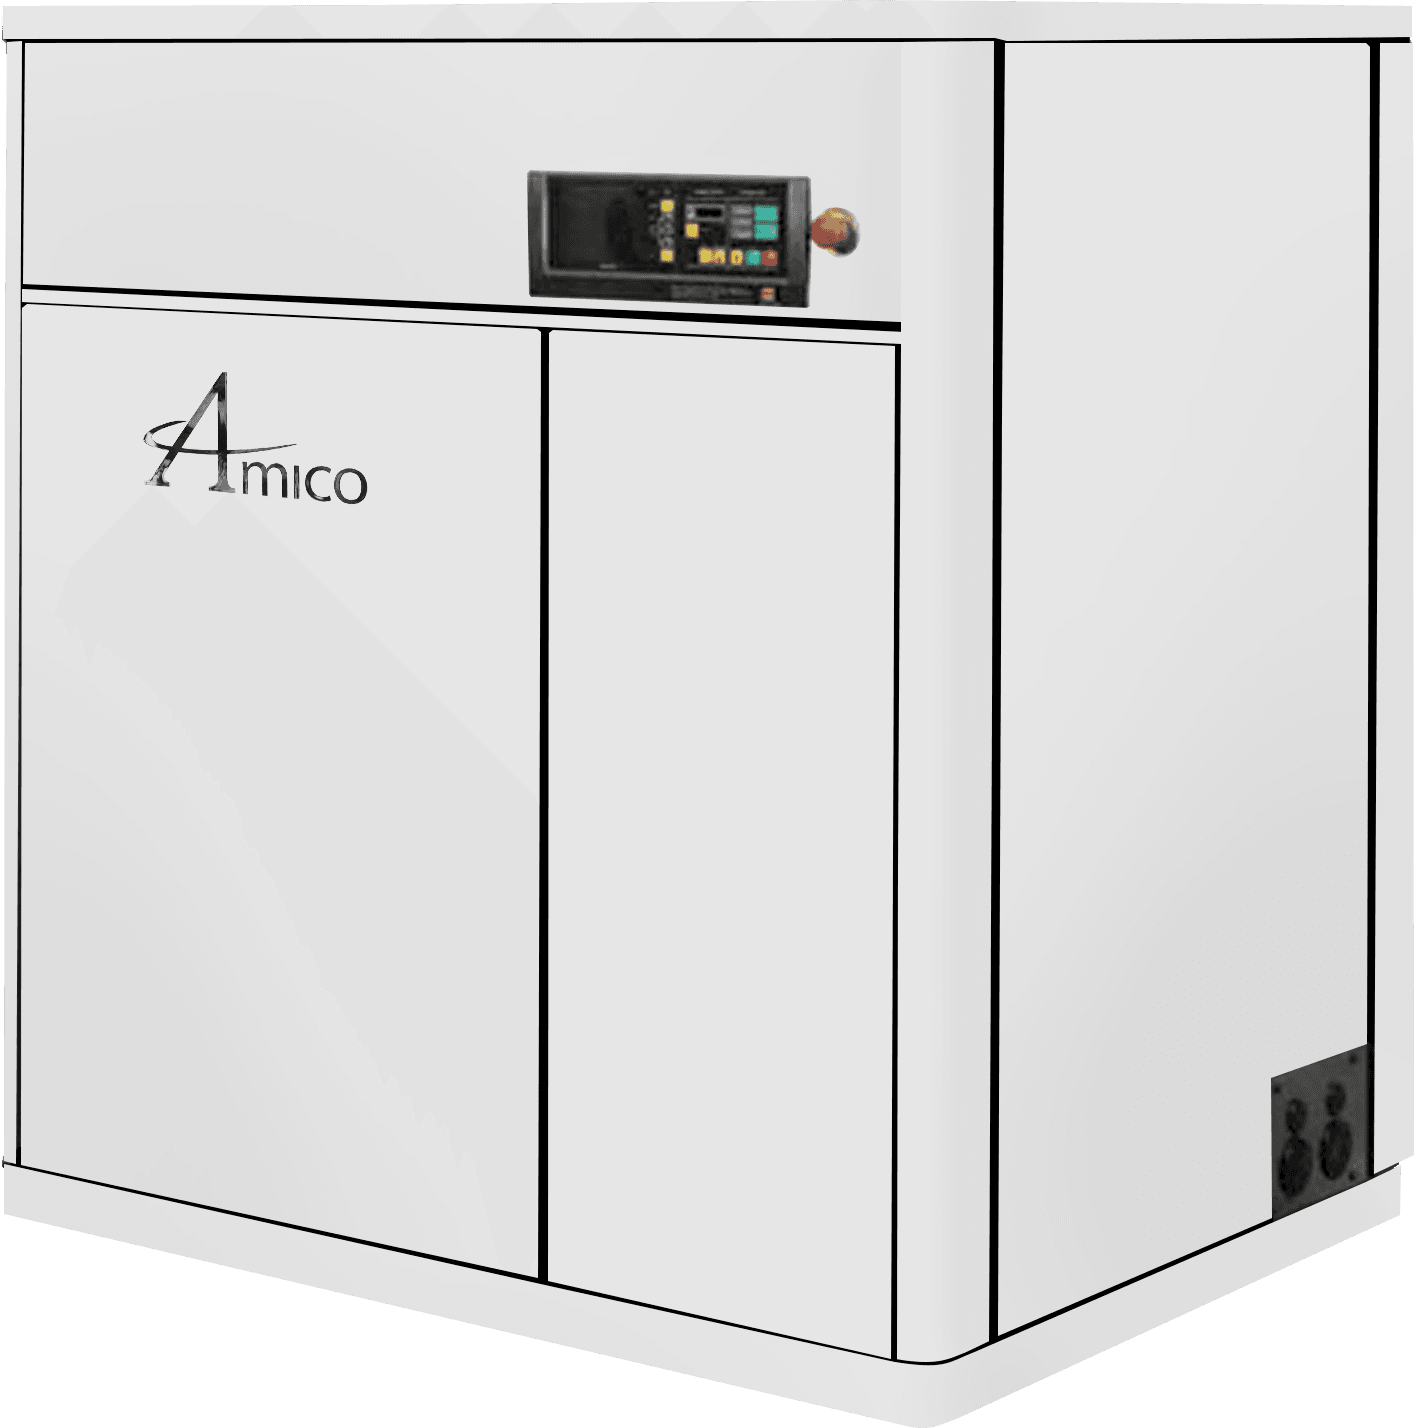 Main image for Amico's Oil-Free Rotary Screw